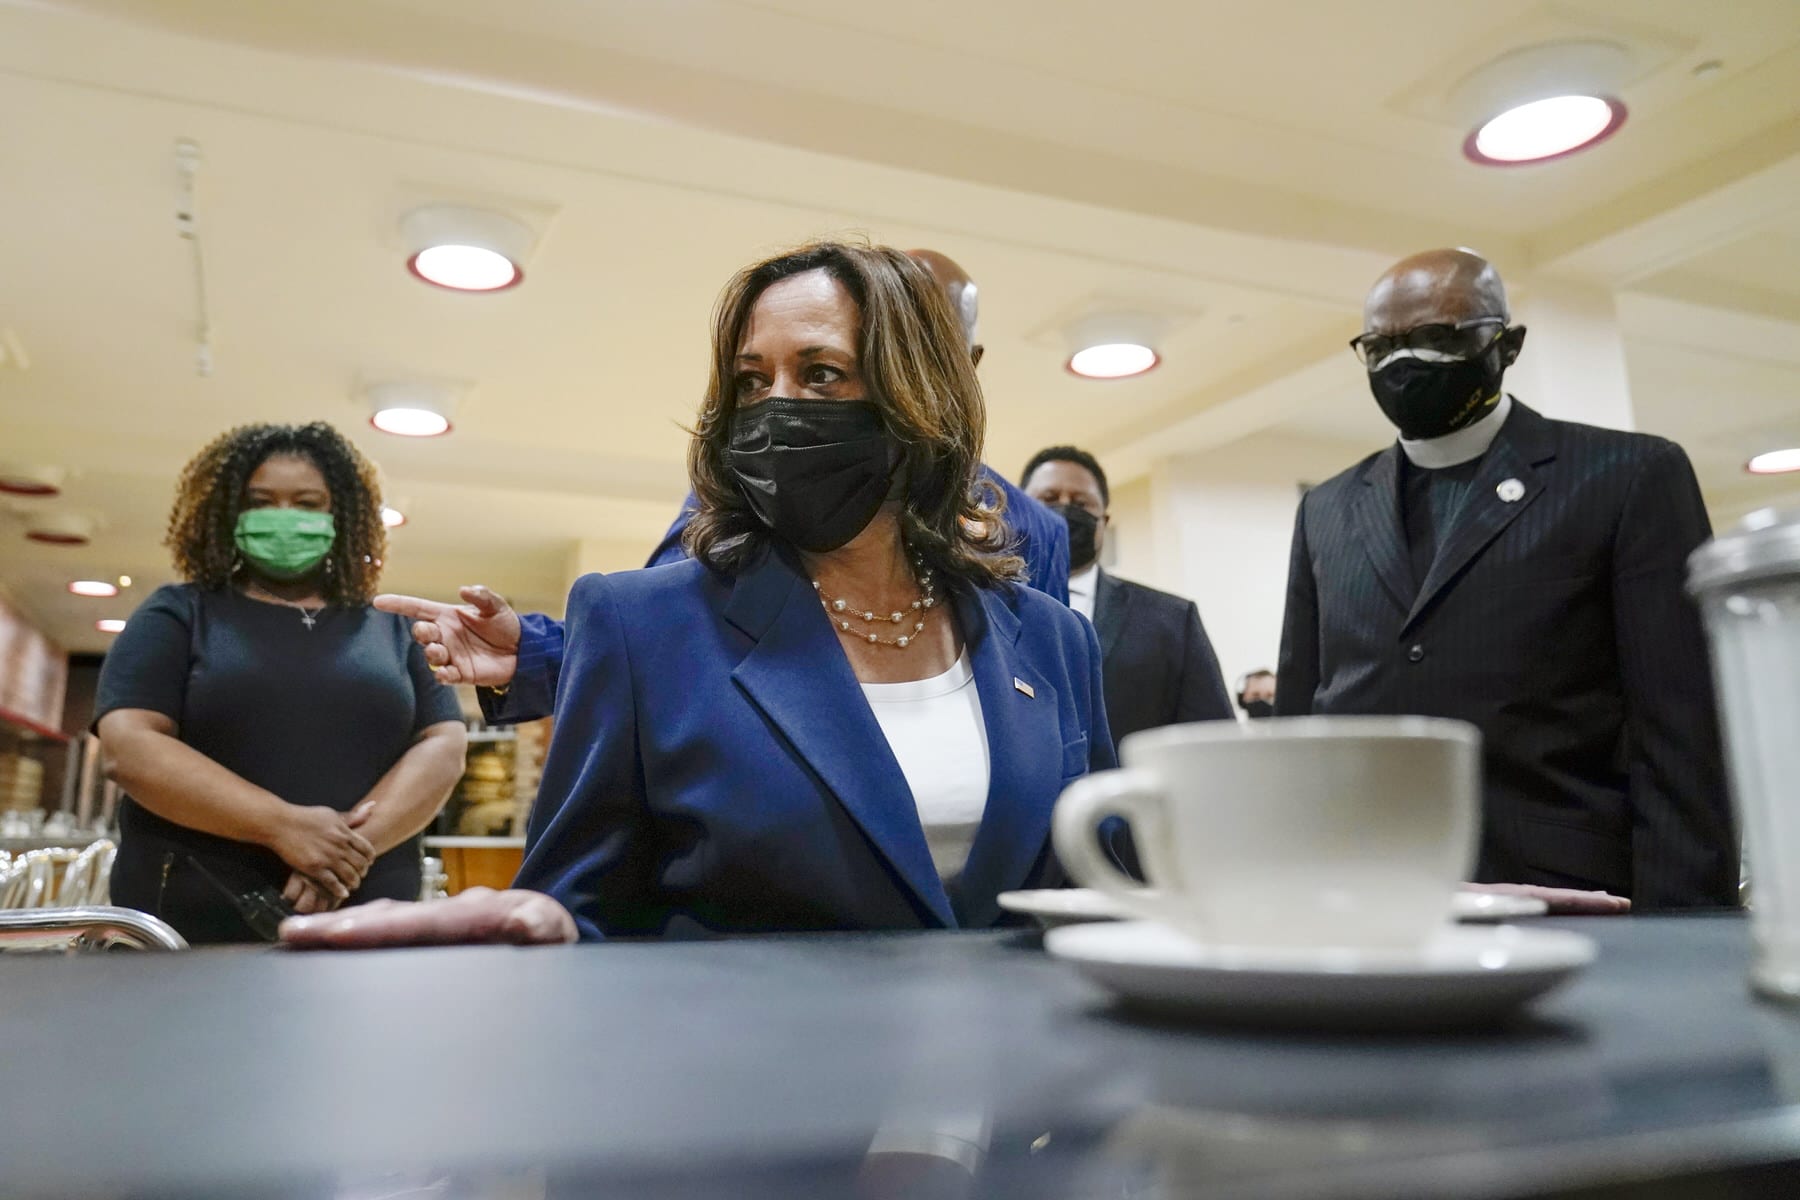 Vice President Kamala Harris sits at the lunch counter as others look on while she visits the International Civil Rights Center and Museum.